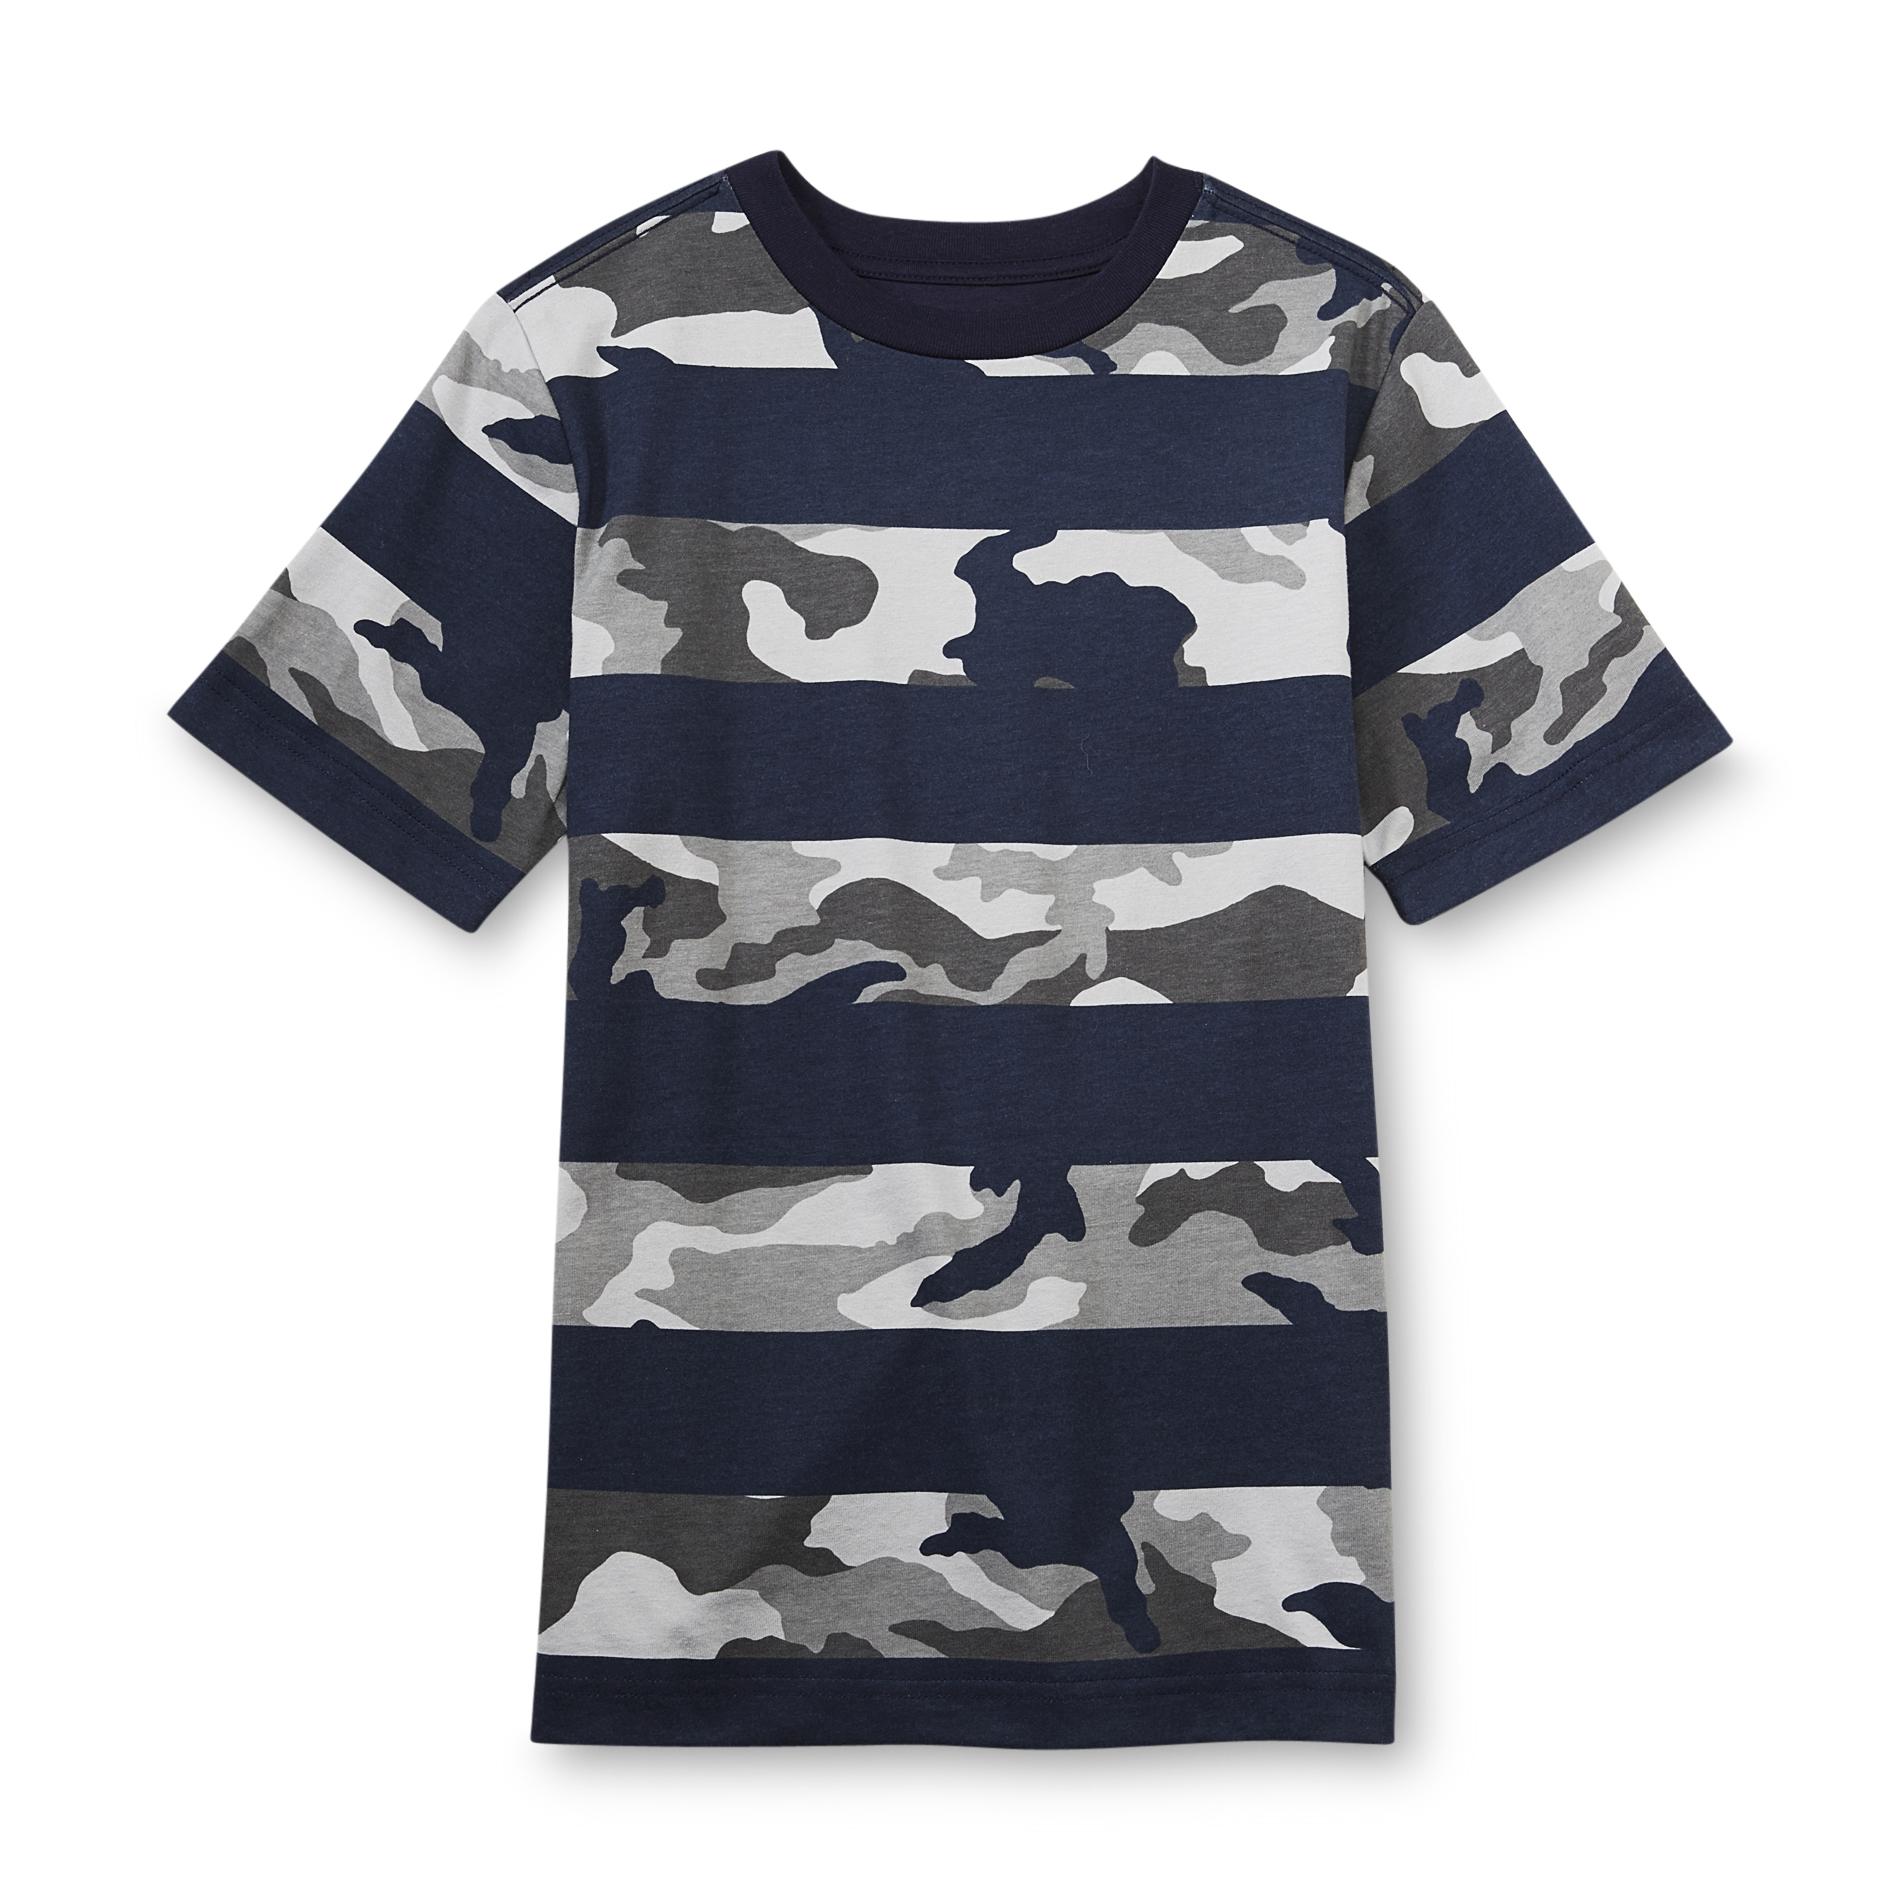 Basic Editions Boy's T-Shirt - Striped & Camouflage